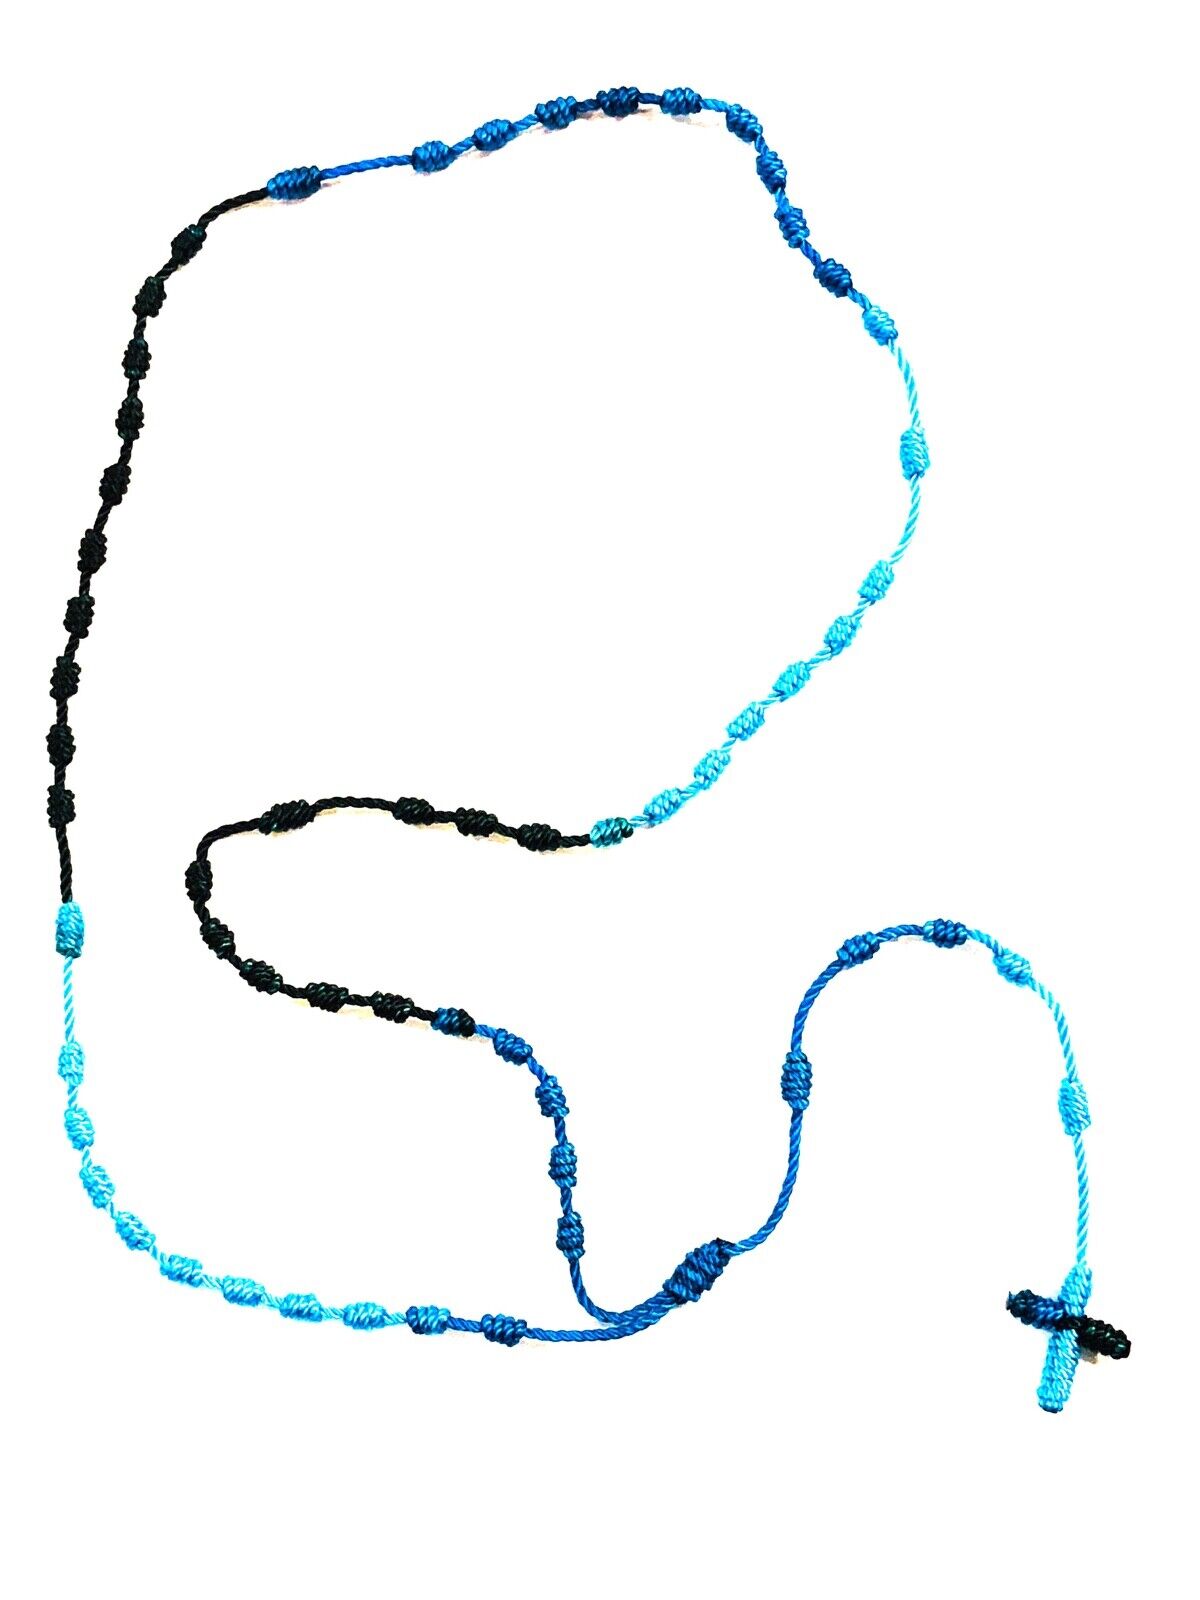 Knotted Rosary - 100% Nylon Thread - Turquoise Mix